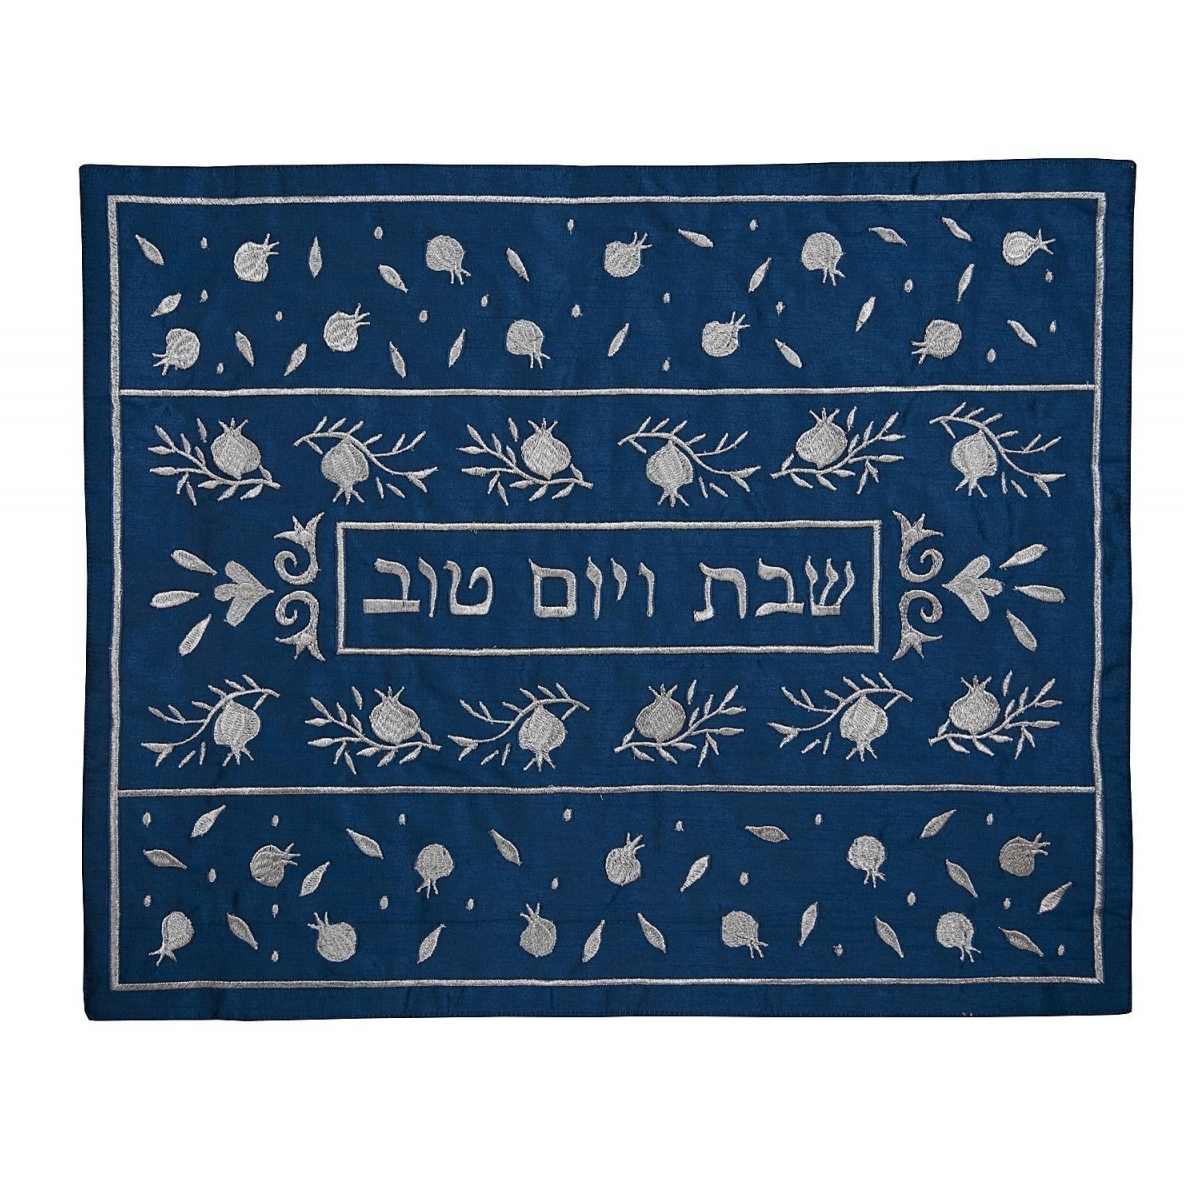 Yair Emanuel Machine Embroidery Challah Cover - Pomegranates (Blue) - 1